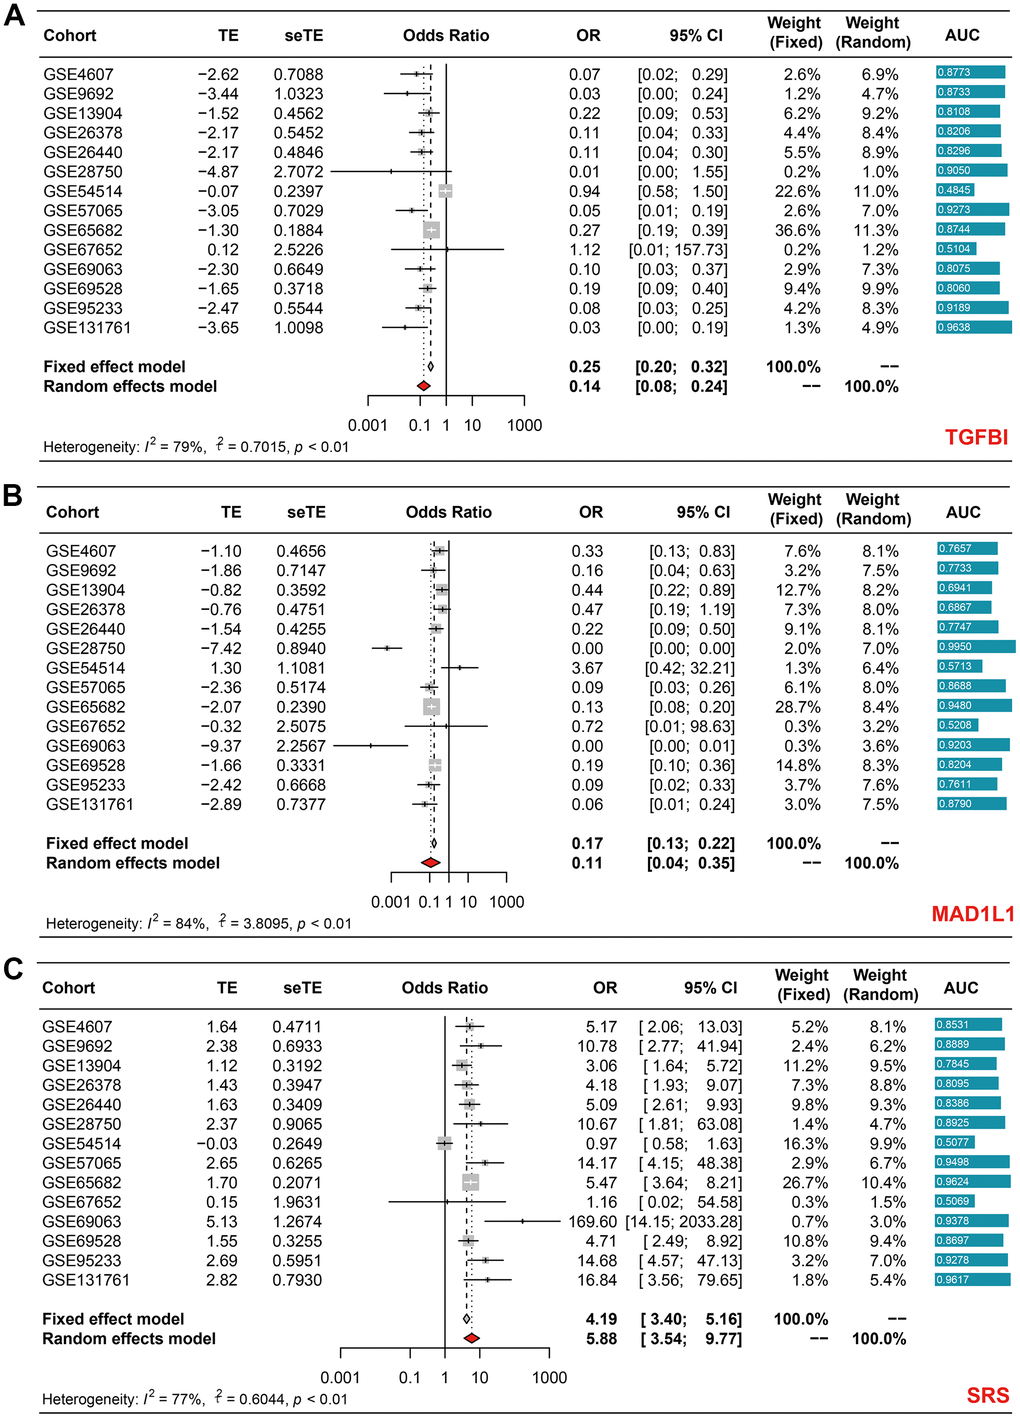 Meta-analyses revealing the diagnostic ability of TGFBI (A), MAD1L1 (B), and SRS (C) in sepsis.